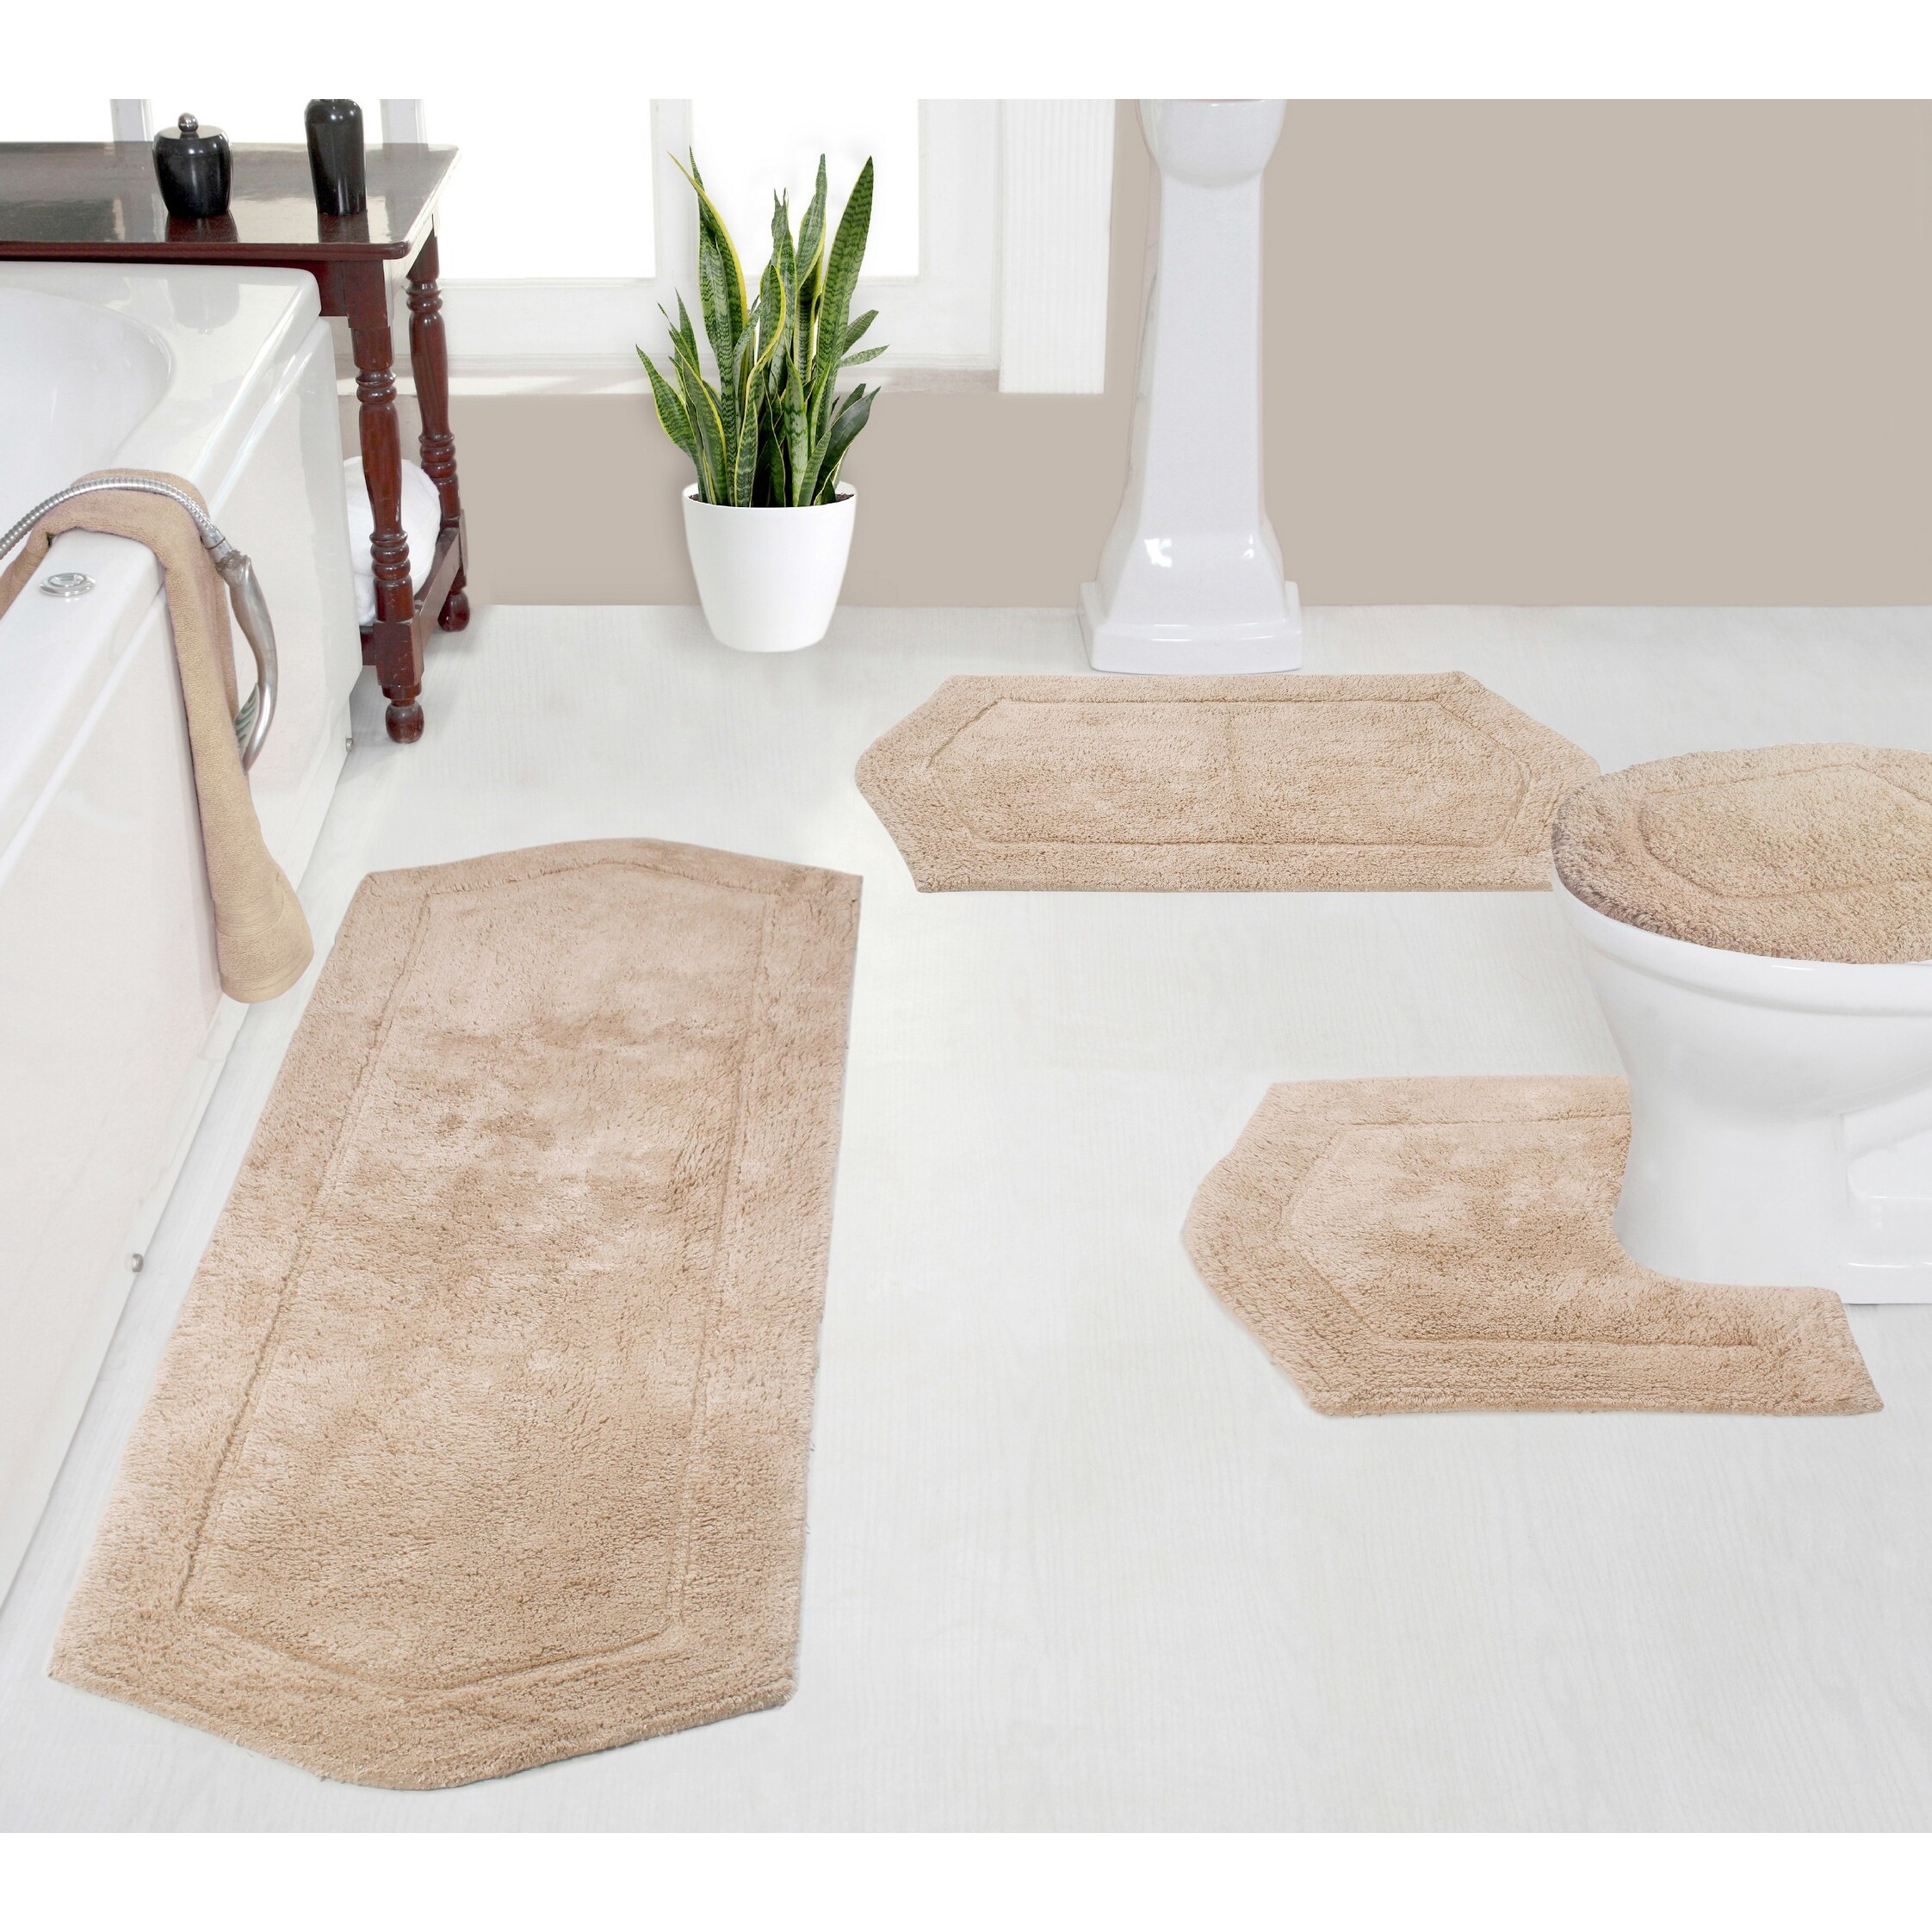 https://ak1.ostkcdn.com/images/products/is/images/direct/48b50d22f8a9c82725aeb0144ce3ea1eede95f2e/Home-Weavers-Waterford-Collection-4-Piece-Set-Bath-Rug-with-Lid-Cover-18%22x18%22%2C-20%22x20%22%2C-21%22x34%22%2C-22%22x60%22.jpg